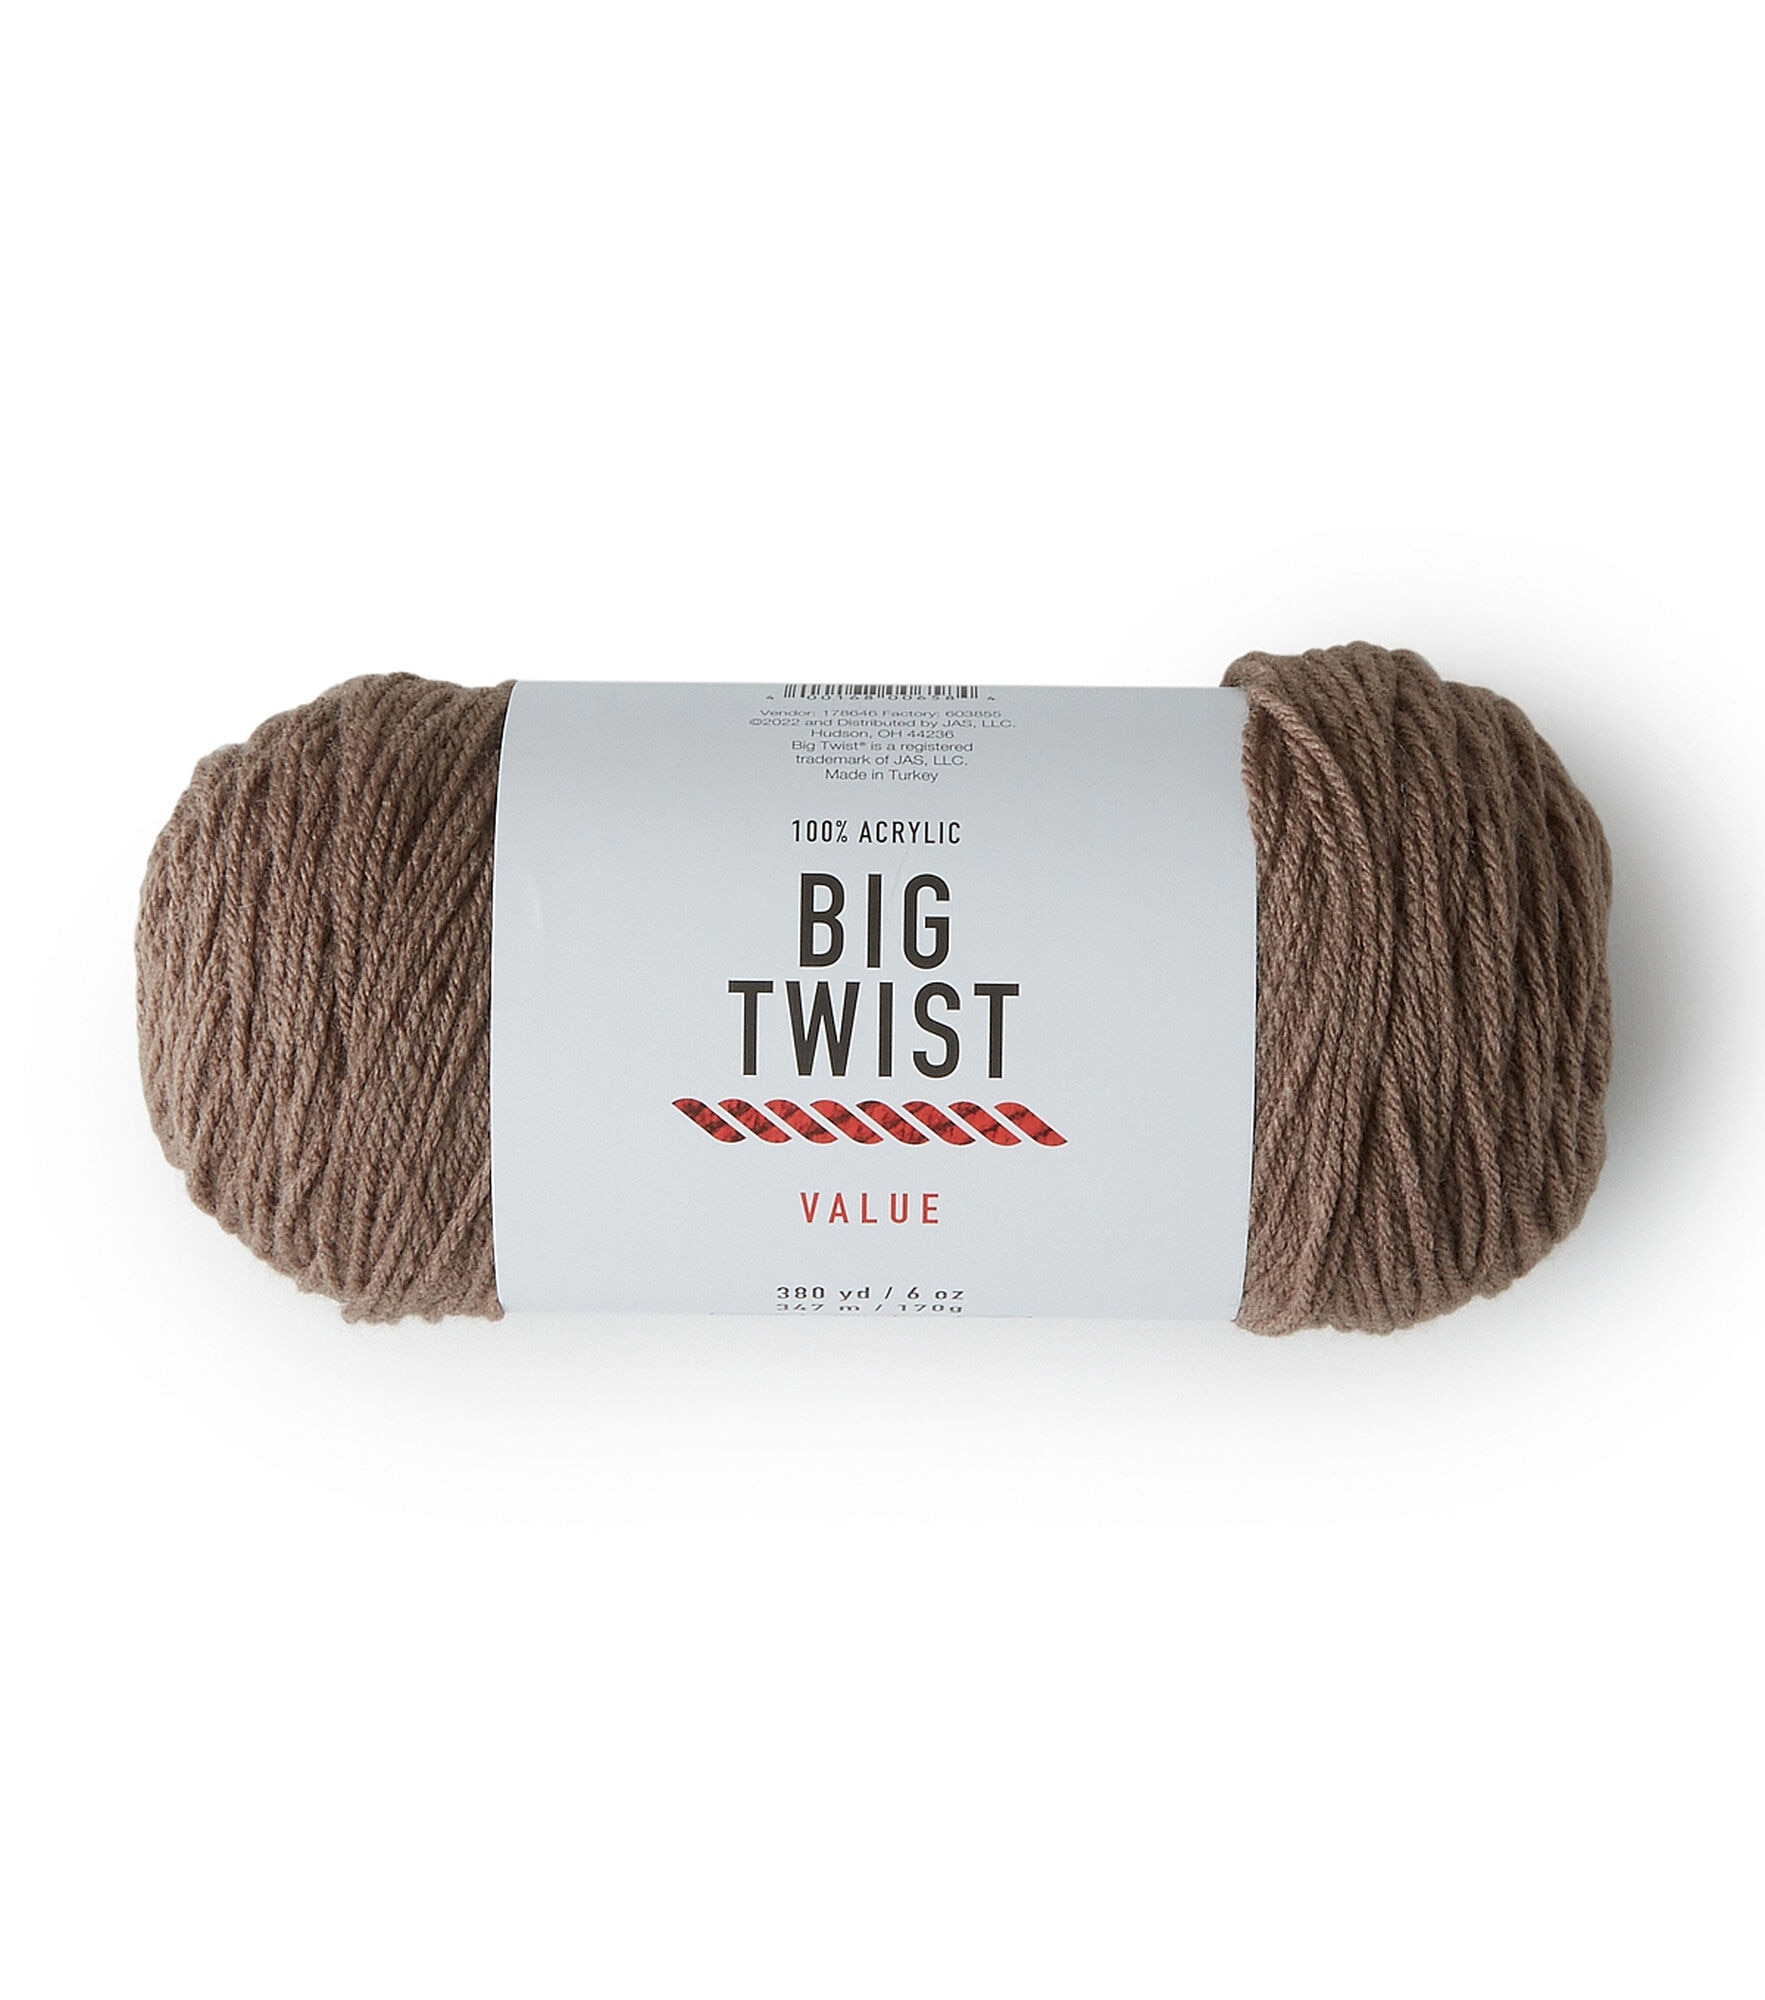 Solid Worsted Acrylic 380yd Value Yarn by Big Twist, Taupe, hi-res